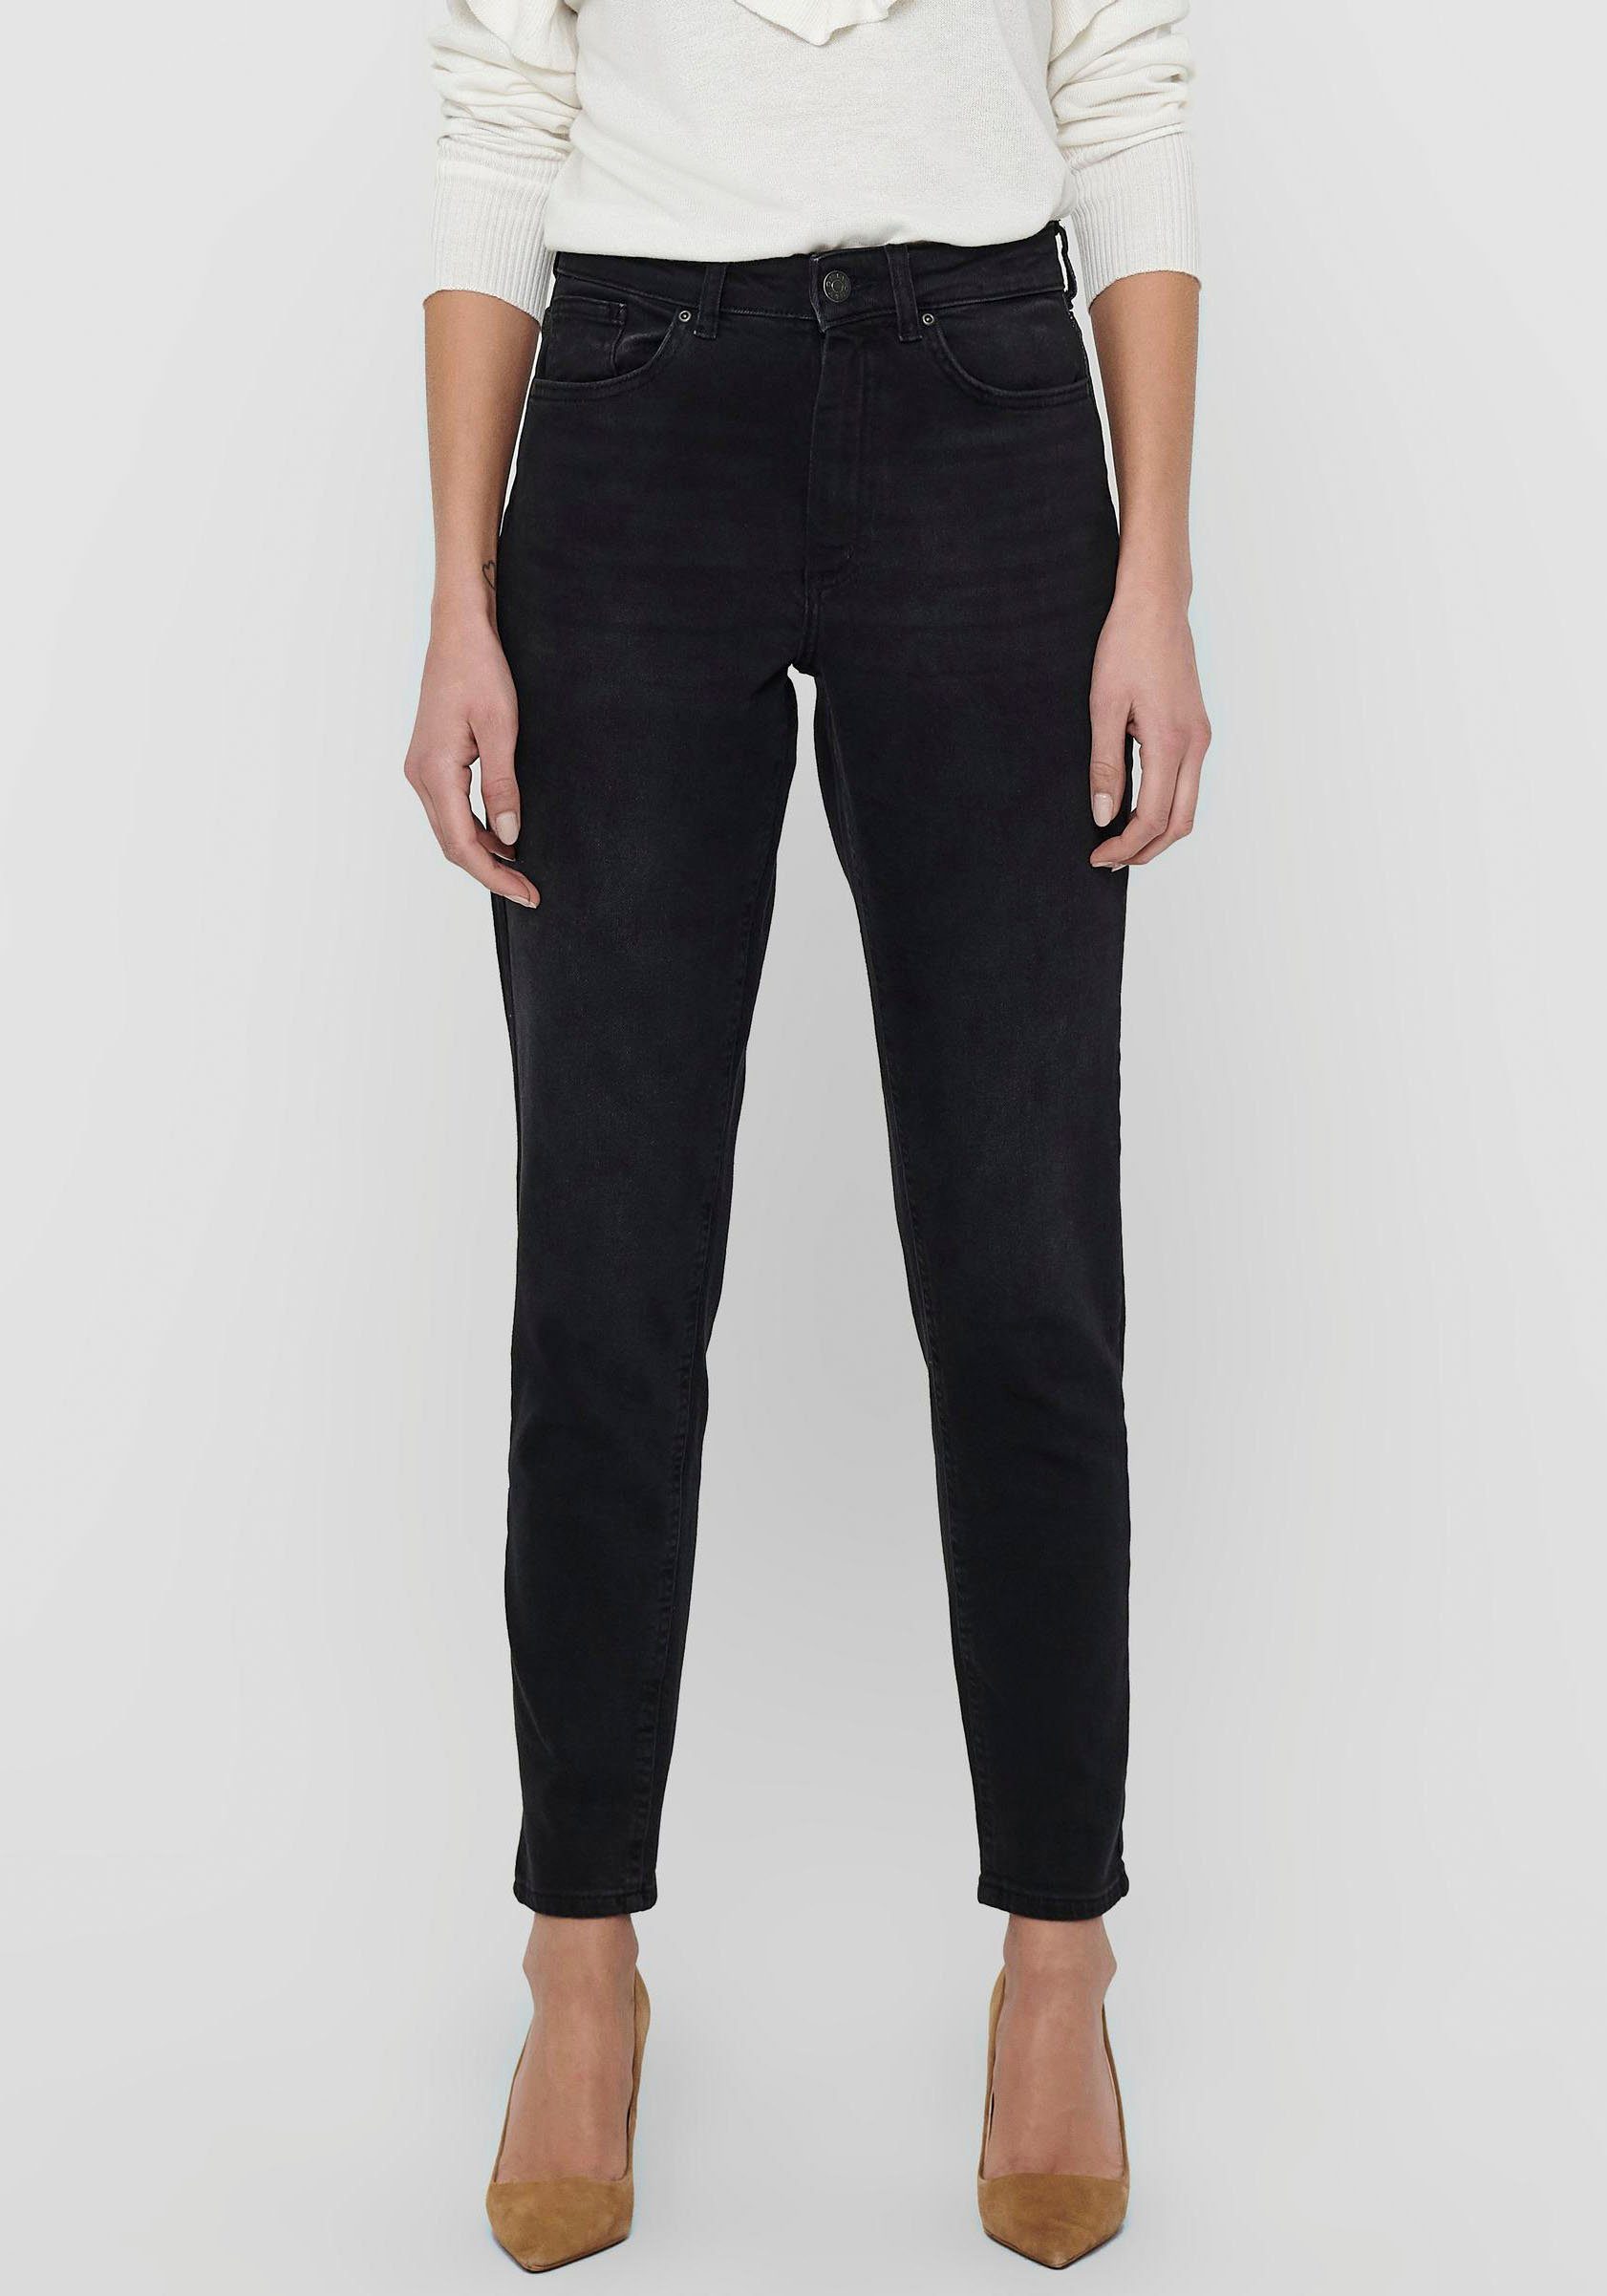 Only Mom-Jeans »ONLVENEDA LIFE MOM JEANS« kaufen | OTTO